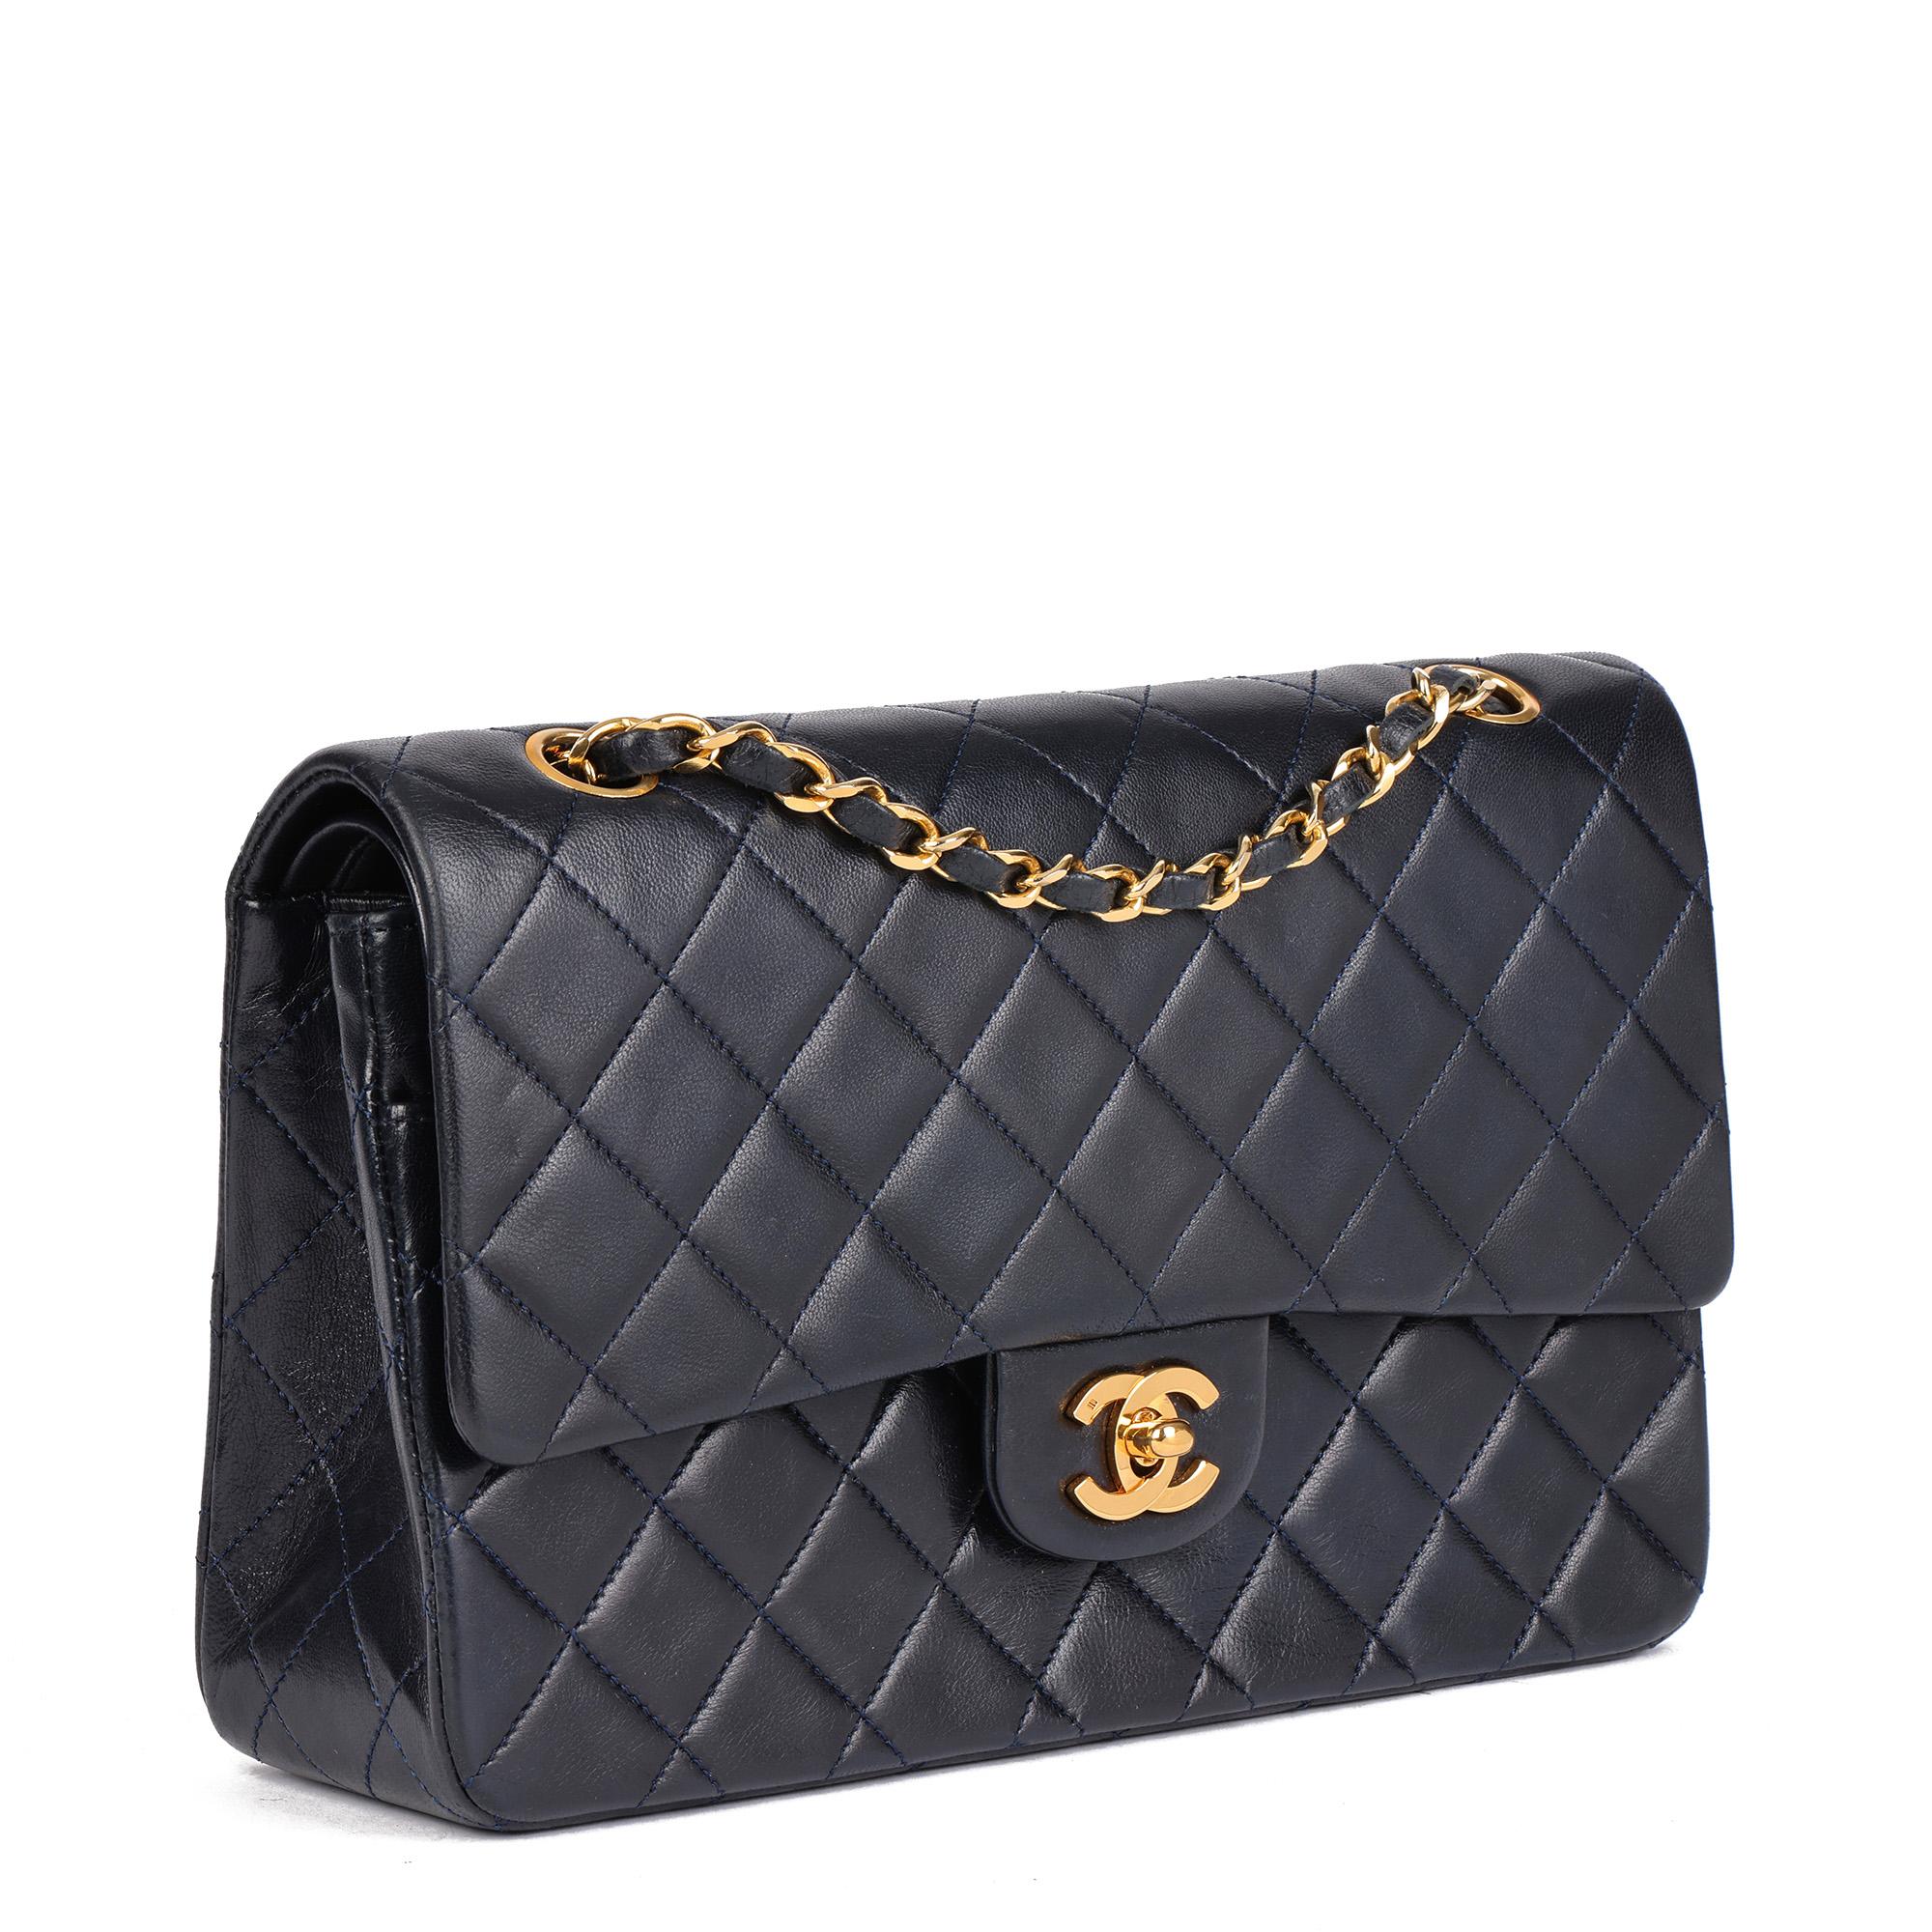 CHANEL
Navy  Quilted Lambskin Vintage Medium Classic Double Flap Bag 

Serial Number: 0587514
Age (Circa): 1987
Accompanied By: Chanel Dust Bag
Authenticity Details: Serial Sticker (Made in France)
Gender: Ladies
Type: Shoulder

Colour: